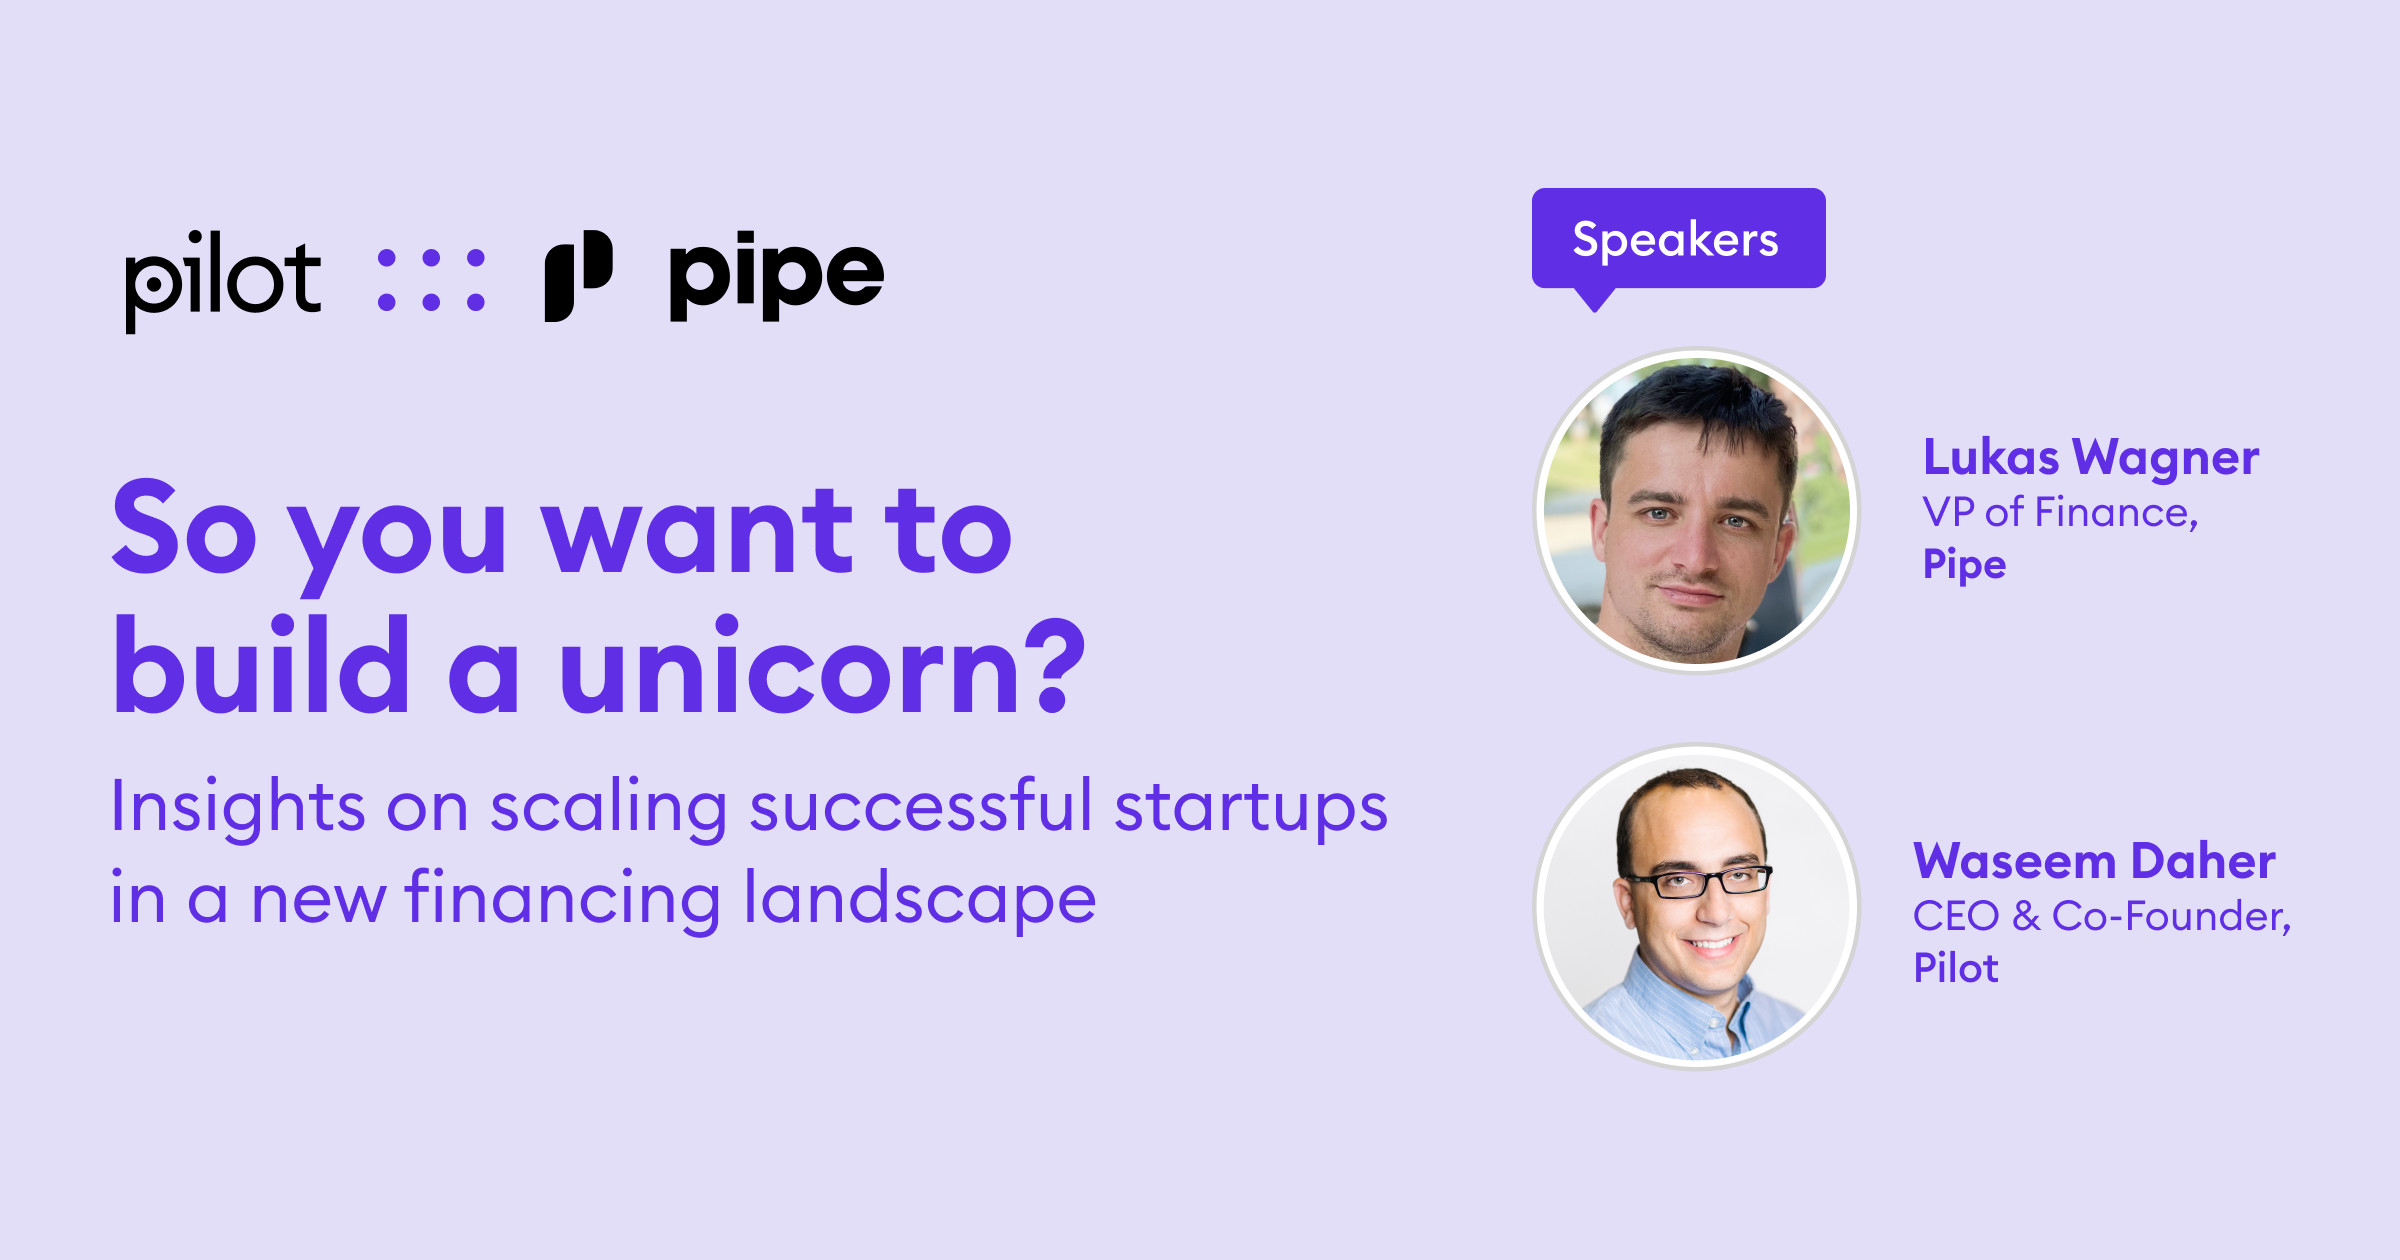 Watch: How to secure startup funding and scale